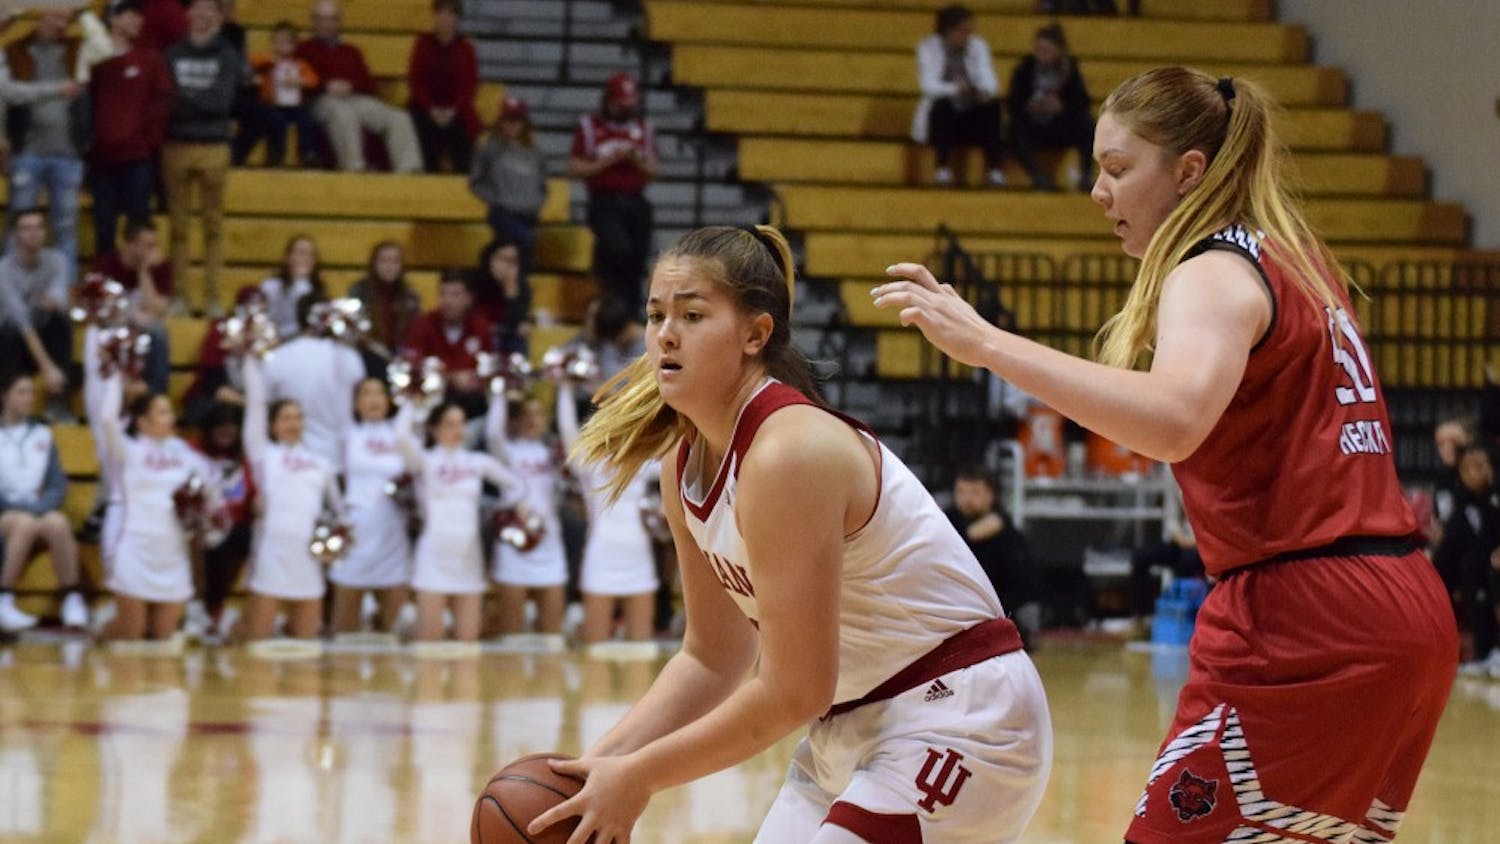 Freshman Center Linsey Marchese looks for a teammate to throw the ball to during the women's basketball game against Arkansas State. IU opened the 2017-18 season with a 93-51win against Arkansas State at Simon Skjodt Assembly Hall.